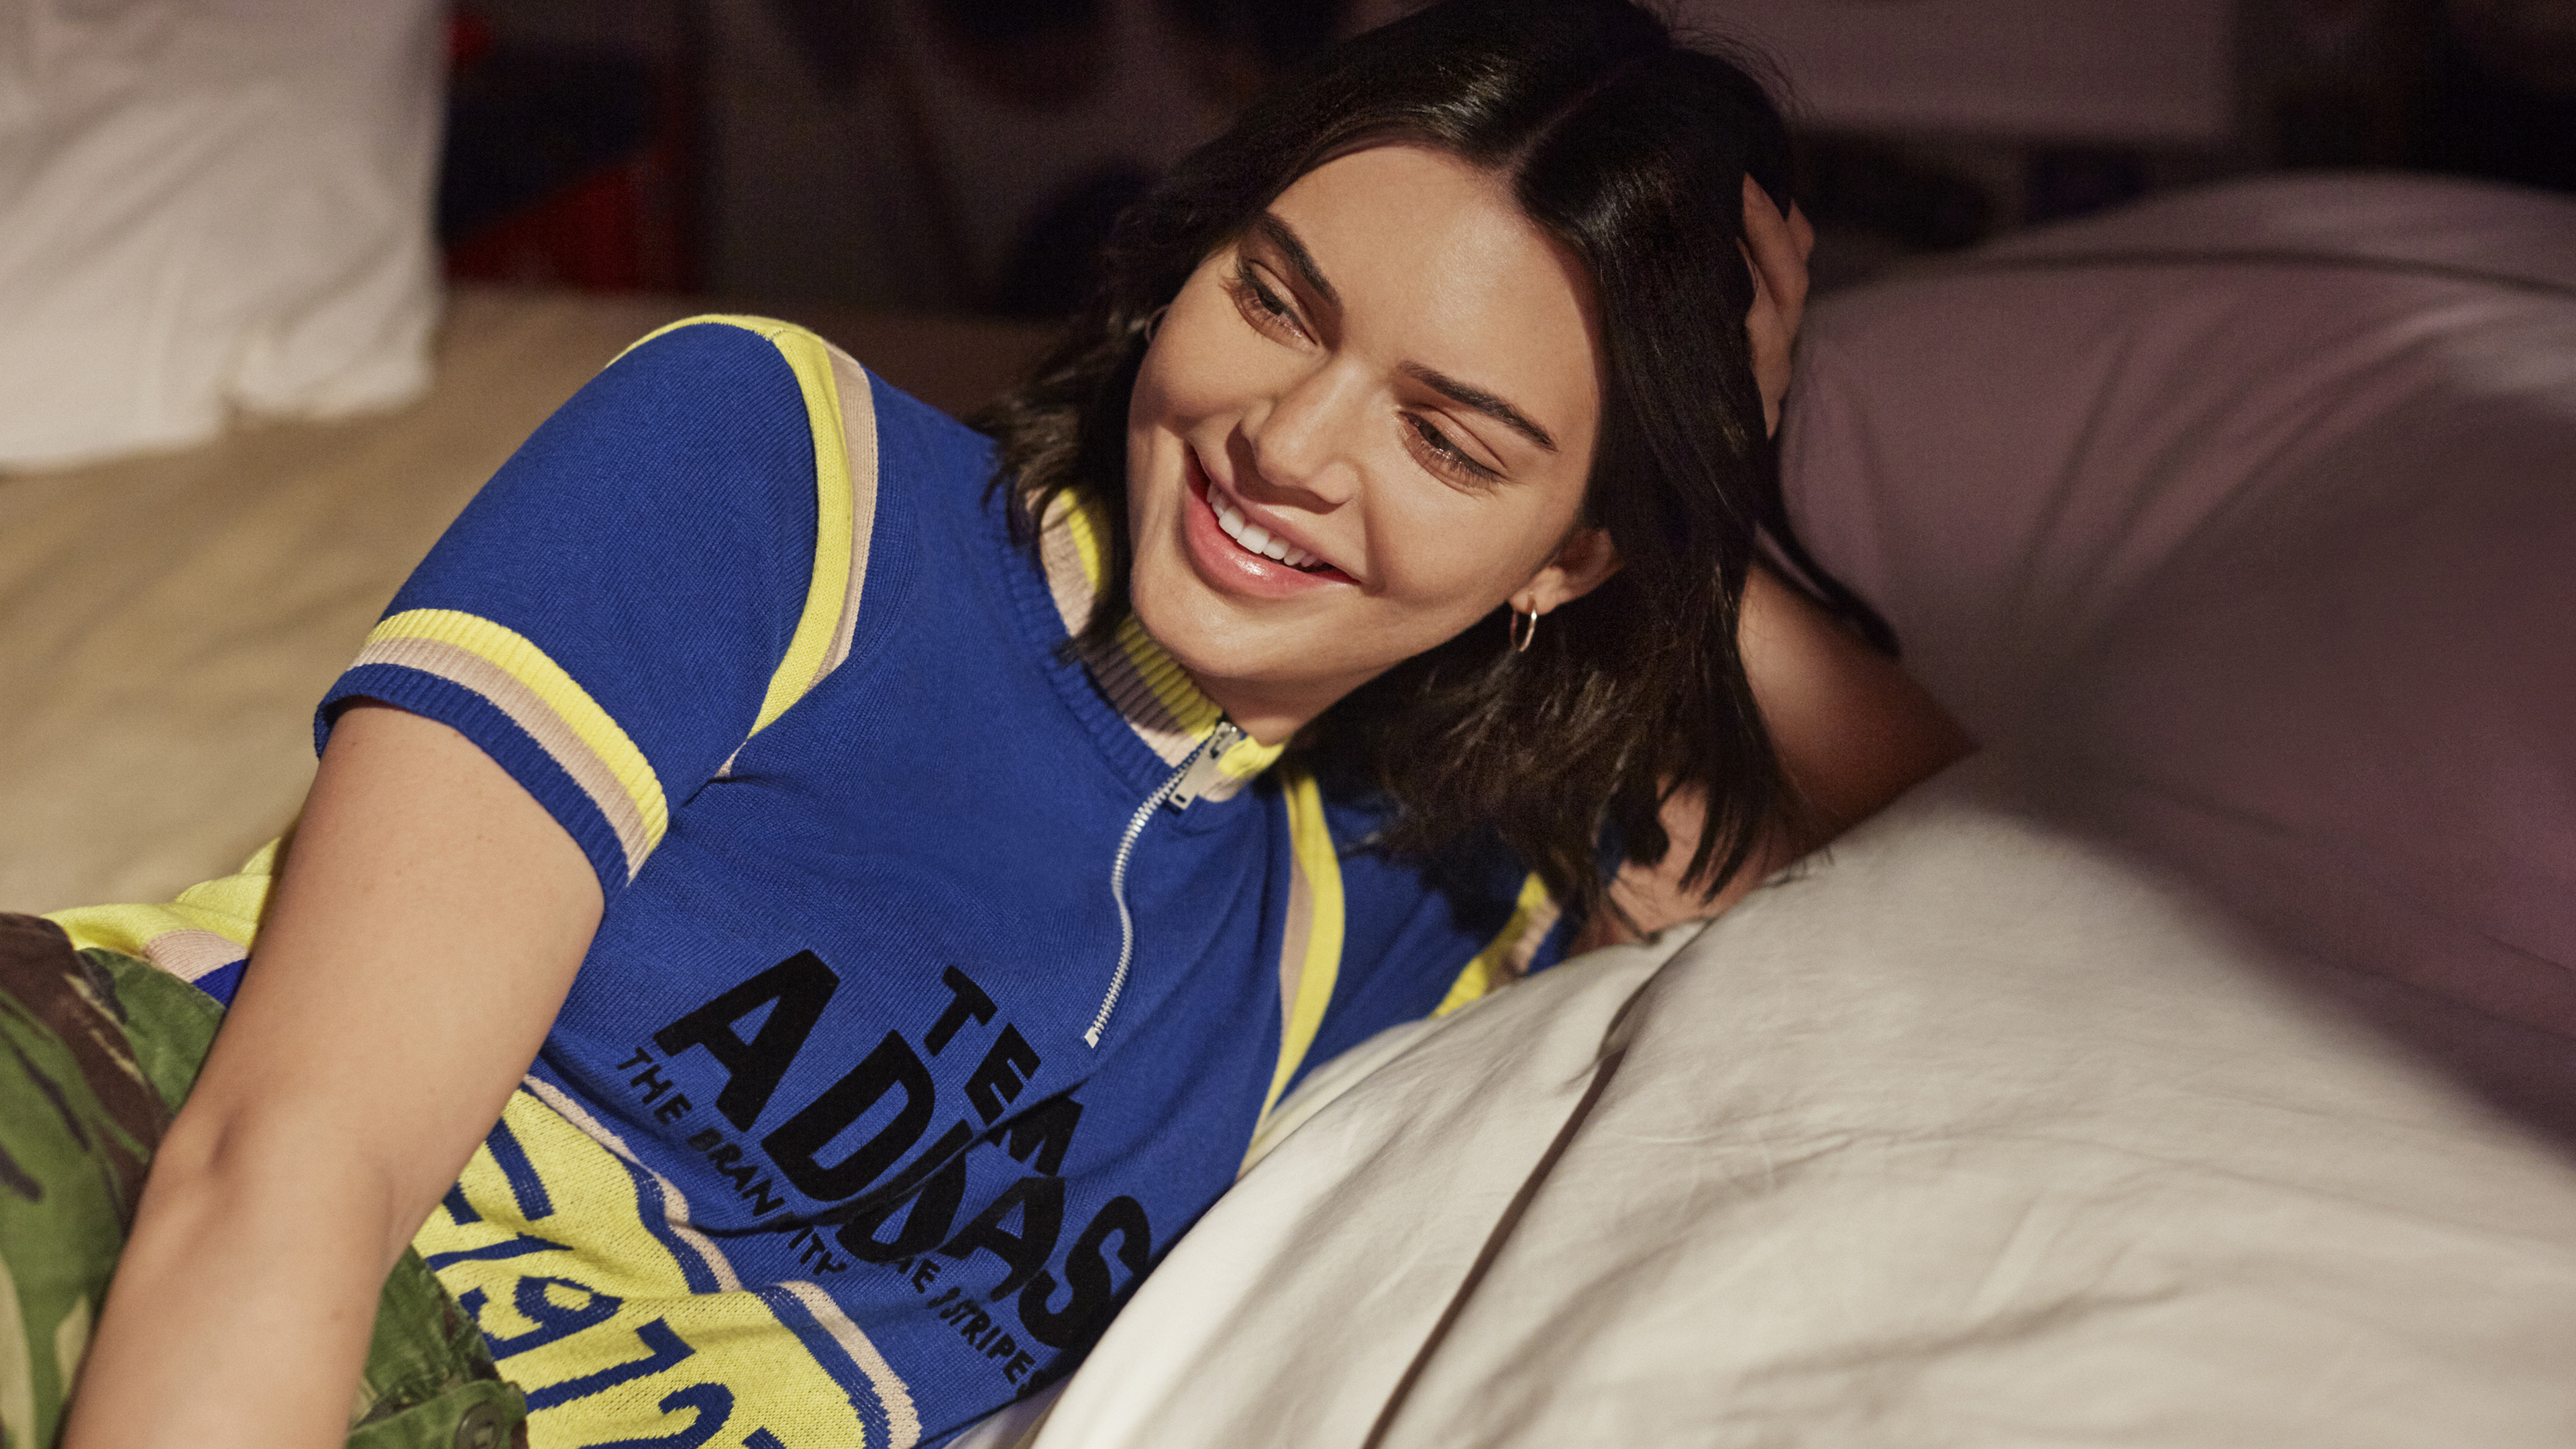 kendall jenner adidas campaign 1536944578 - Kendall Jenner Adidas Campaign - model wallpapers, kendall jenner wallpapers, hd-wallpapers, girls wallpapers, celebrities wallpapers, adidas wallpapers, 4k-wallpapers